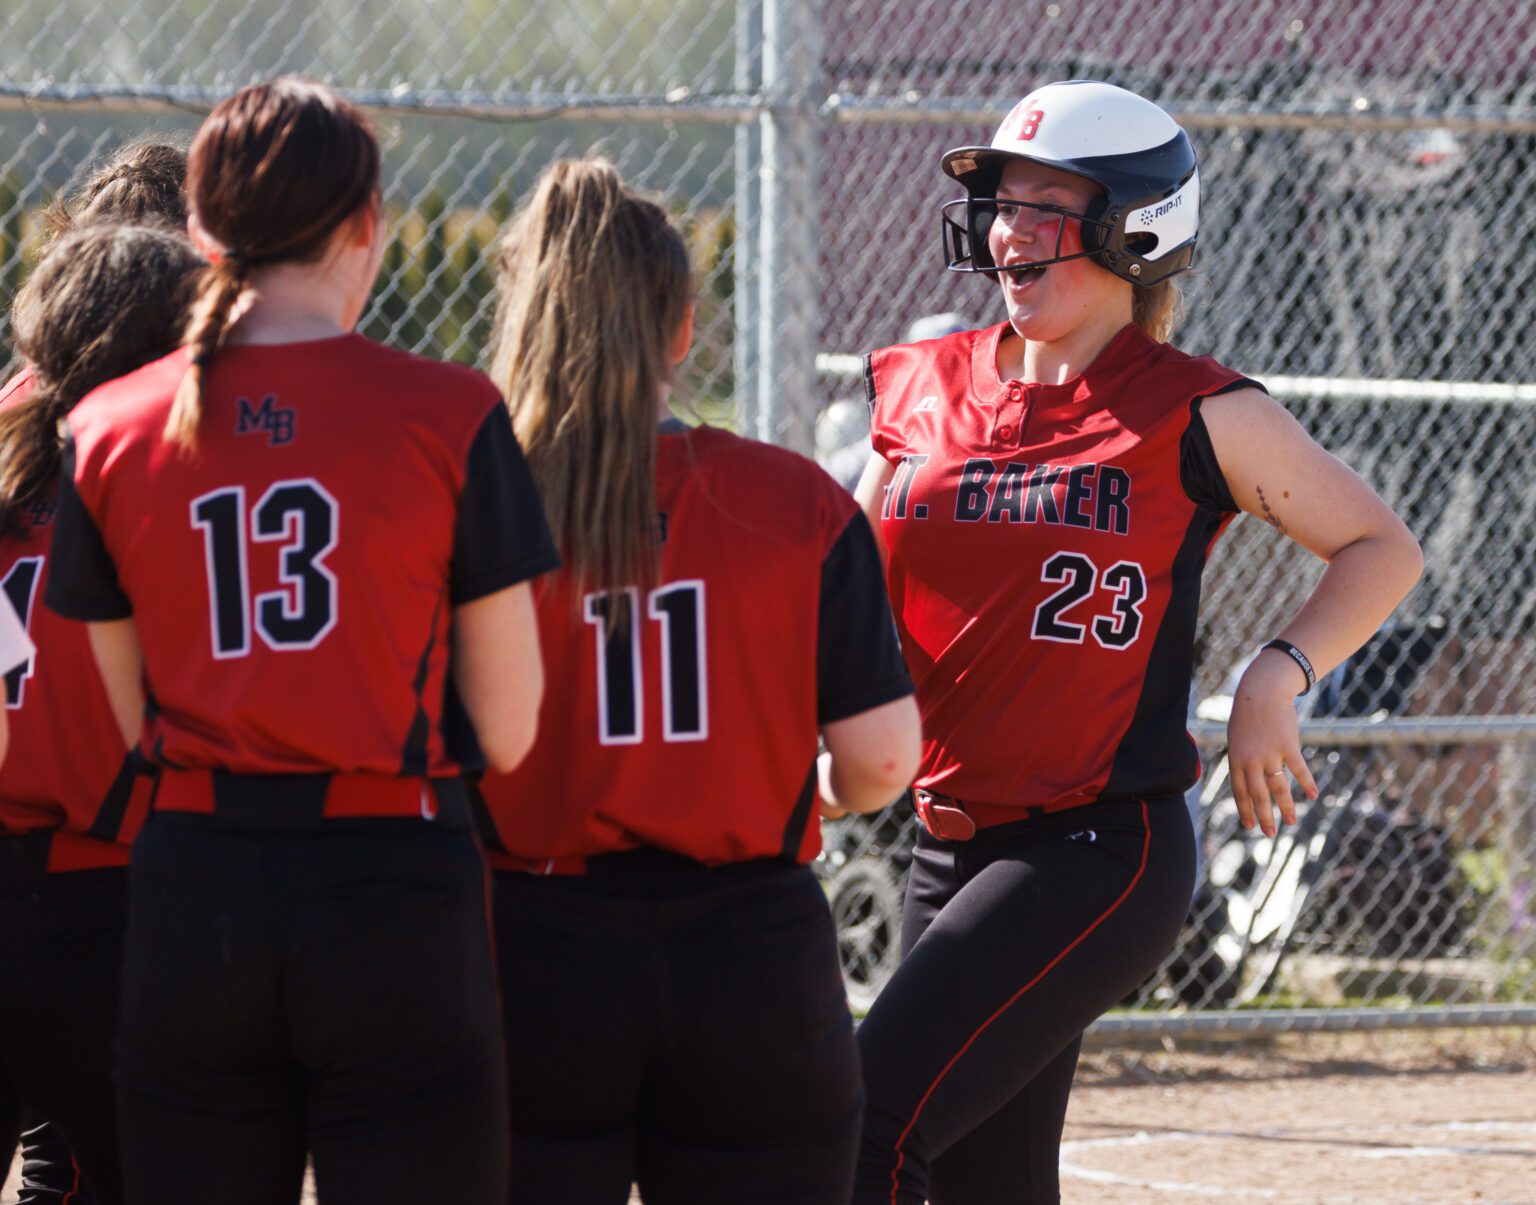 Mount Baker’s Ava Jeretsky meets her teammates at home plate after hitting a three-run home run April 28 as the Mountaineers beat Nooksack Valley 31-8 in four innings at Nooksack Valley Middle School.